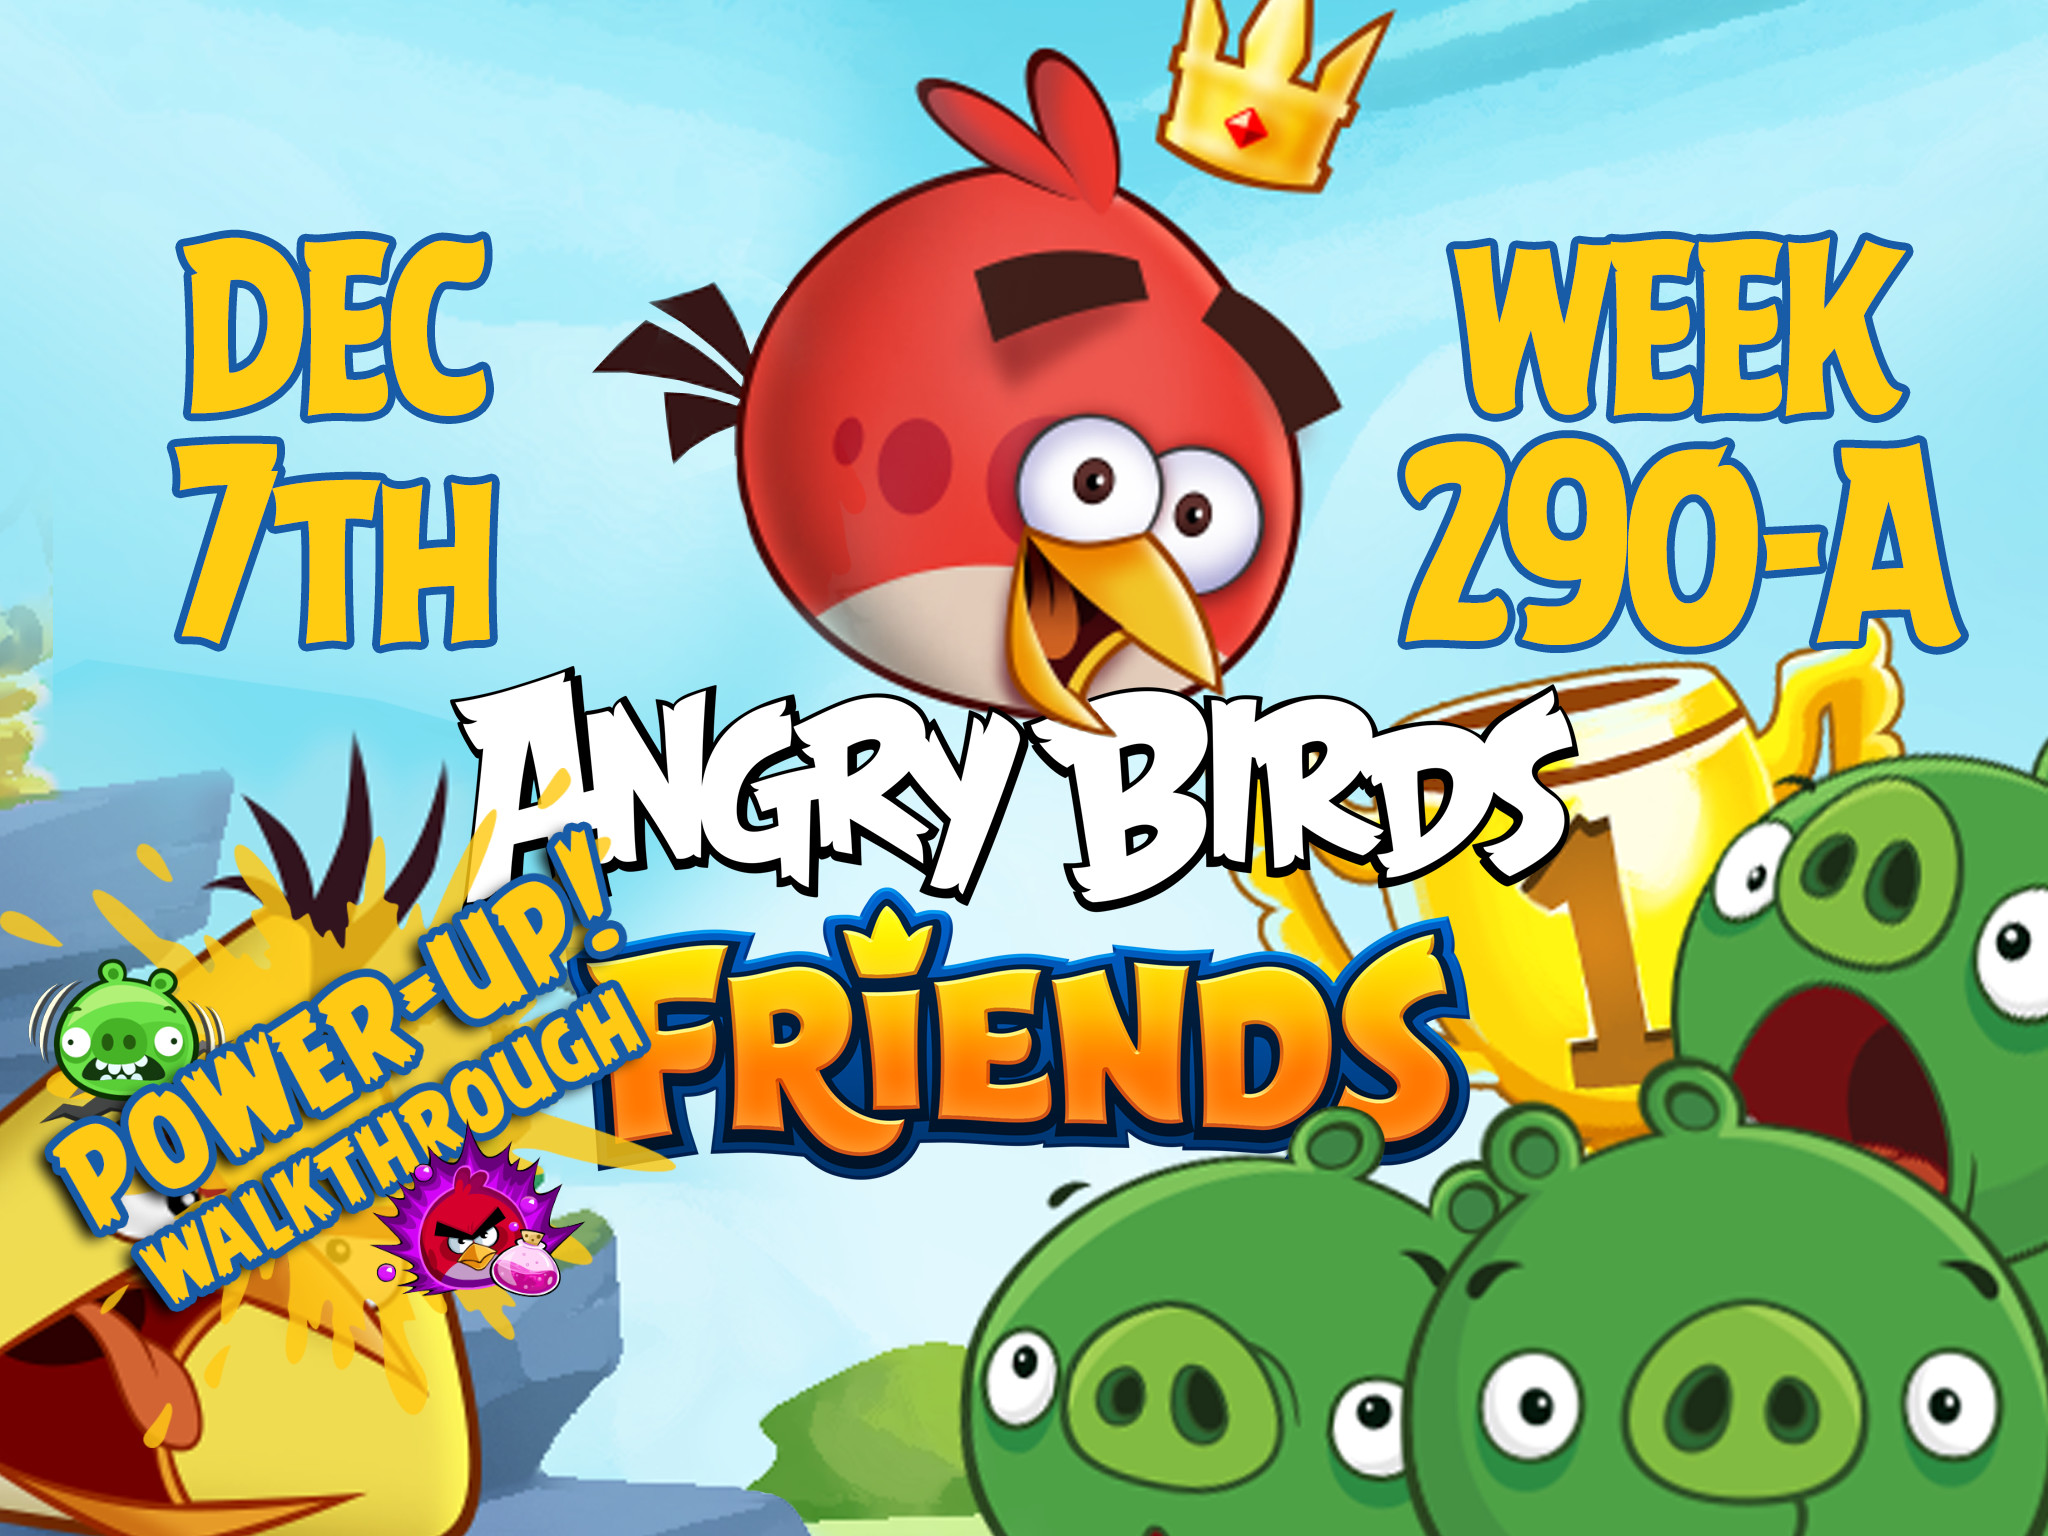 Angry Birds Friends Tournament Week 290-A Feature Image PU